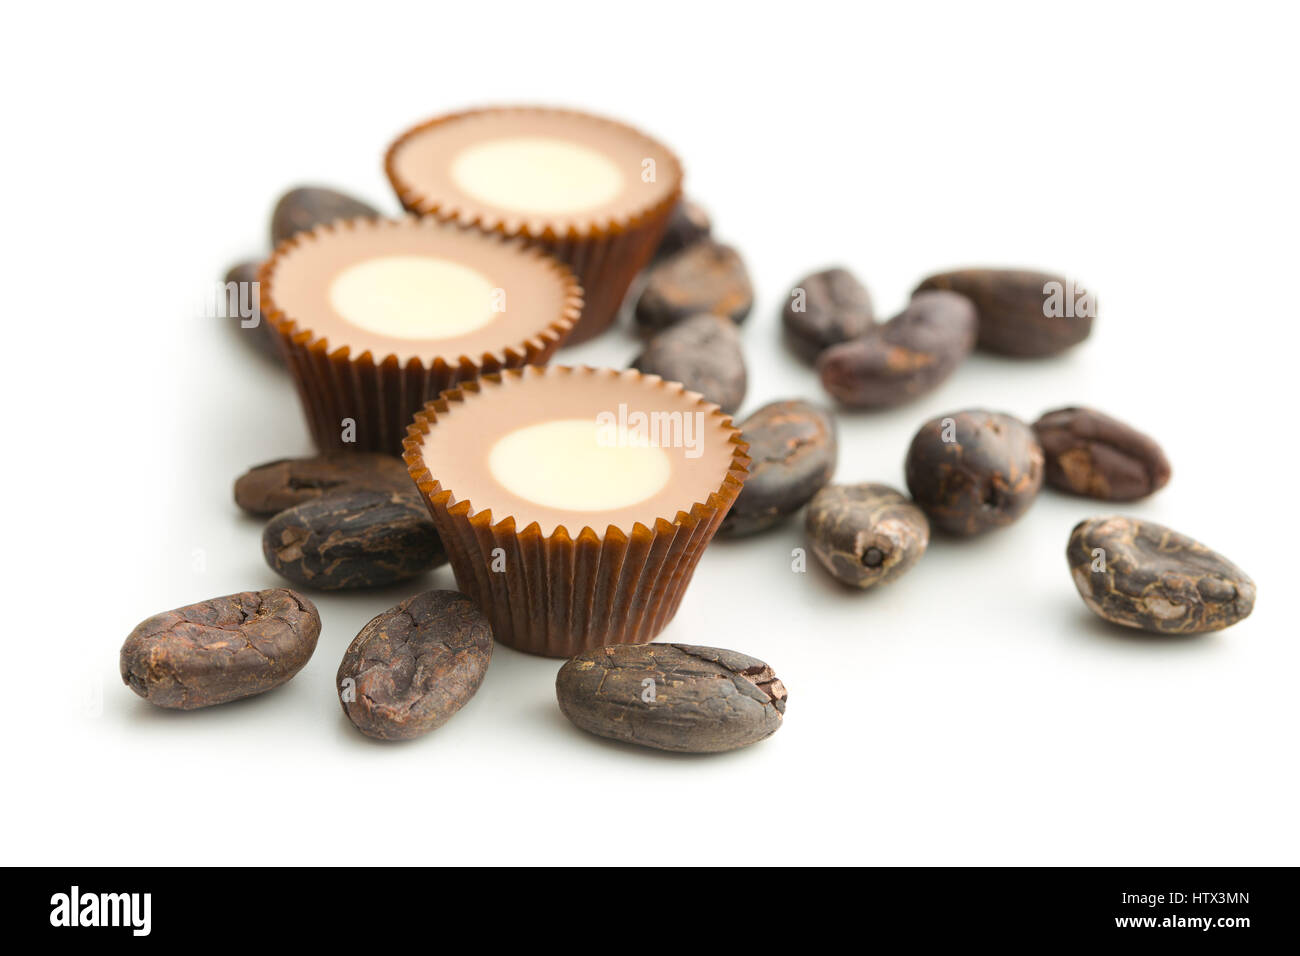 Sweet chocolate pralines with cocoa beans isolated on white background. Stock Photo